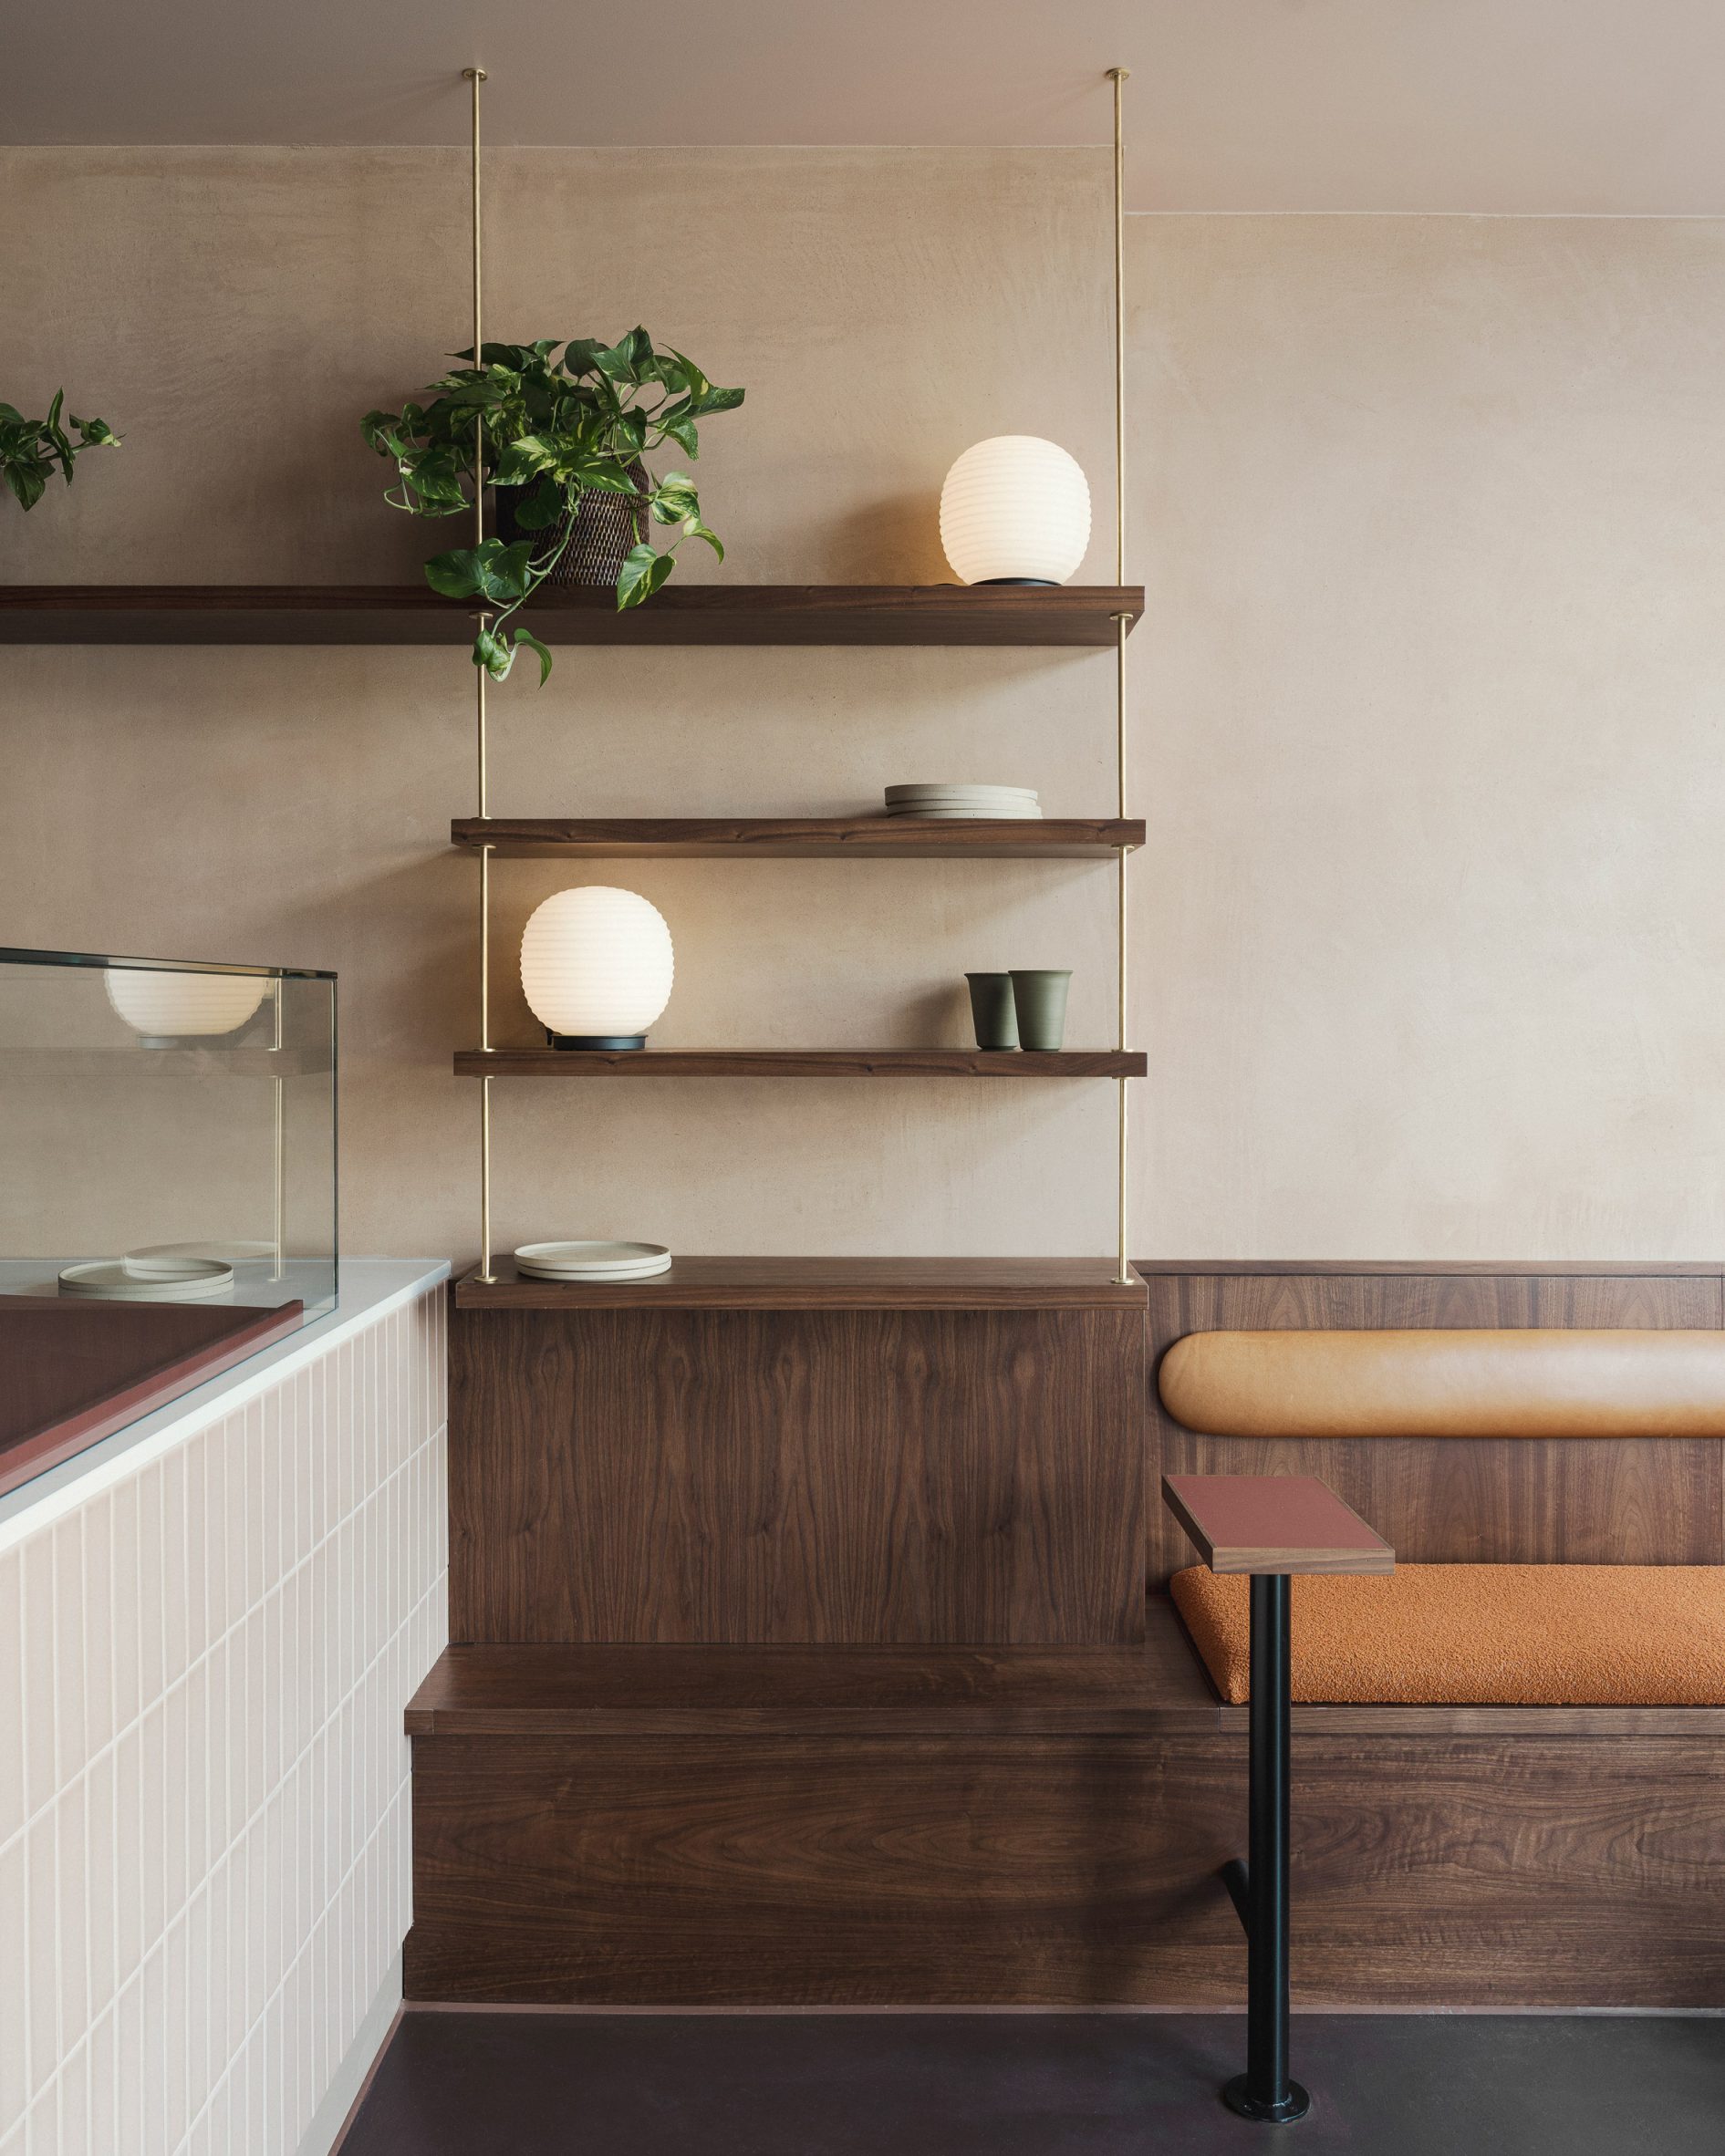 Timber panelling in London cafe